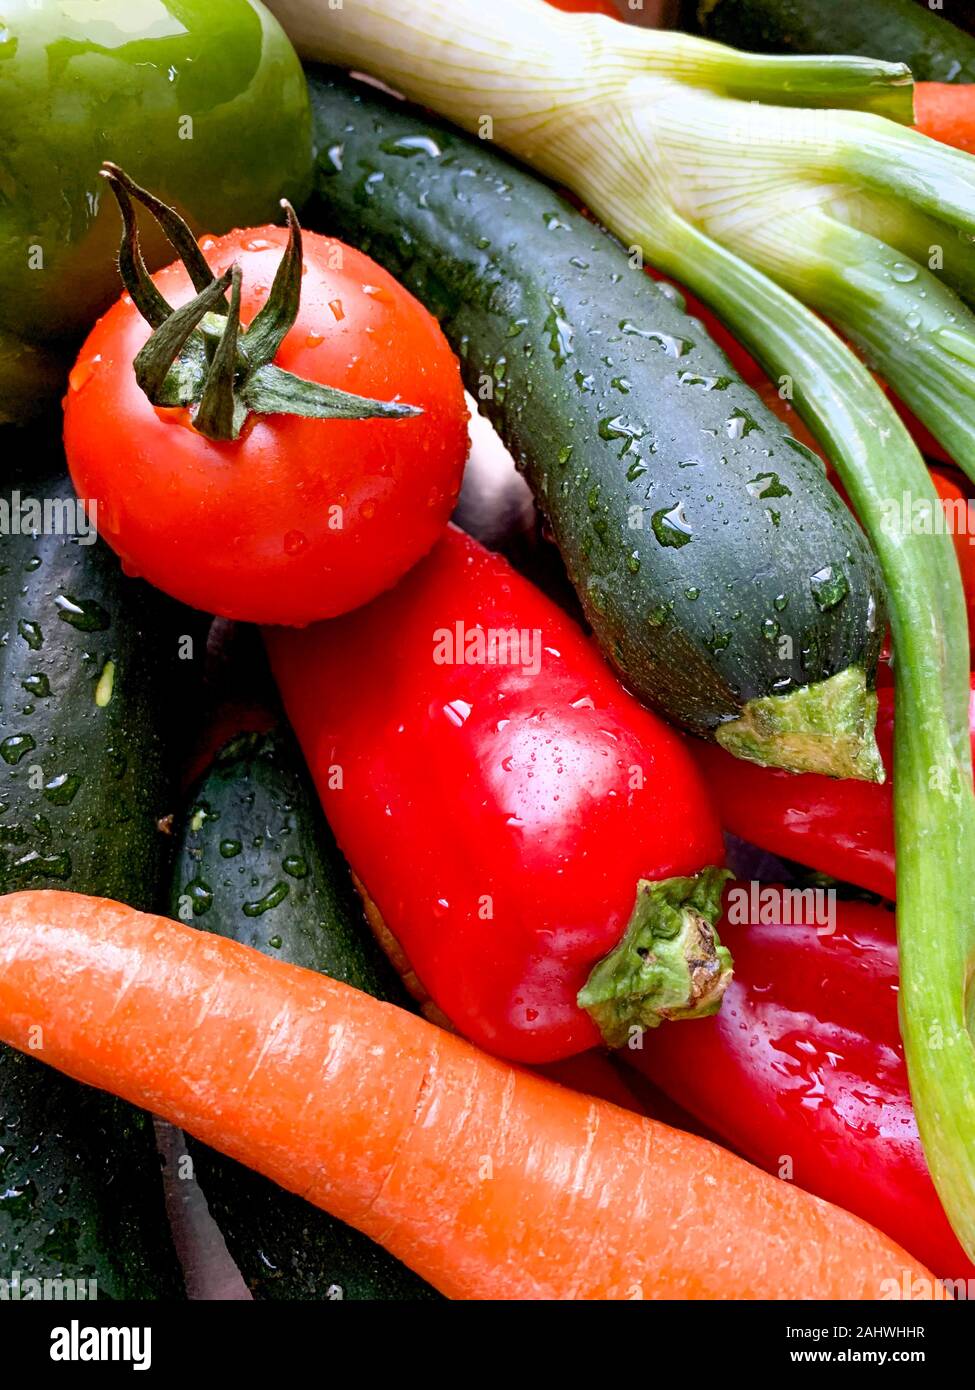 Overhead view of various vegetables with drops of water arranged on a kitchen,, Mediterranean food, Spain Stock Photo